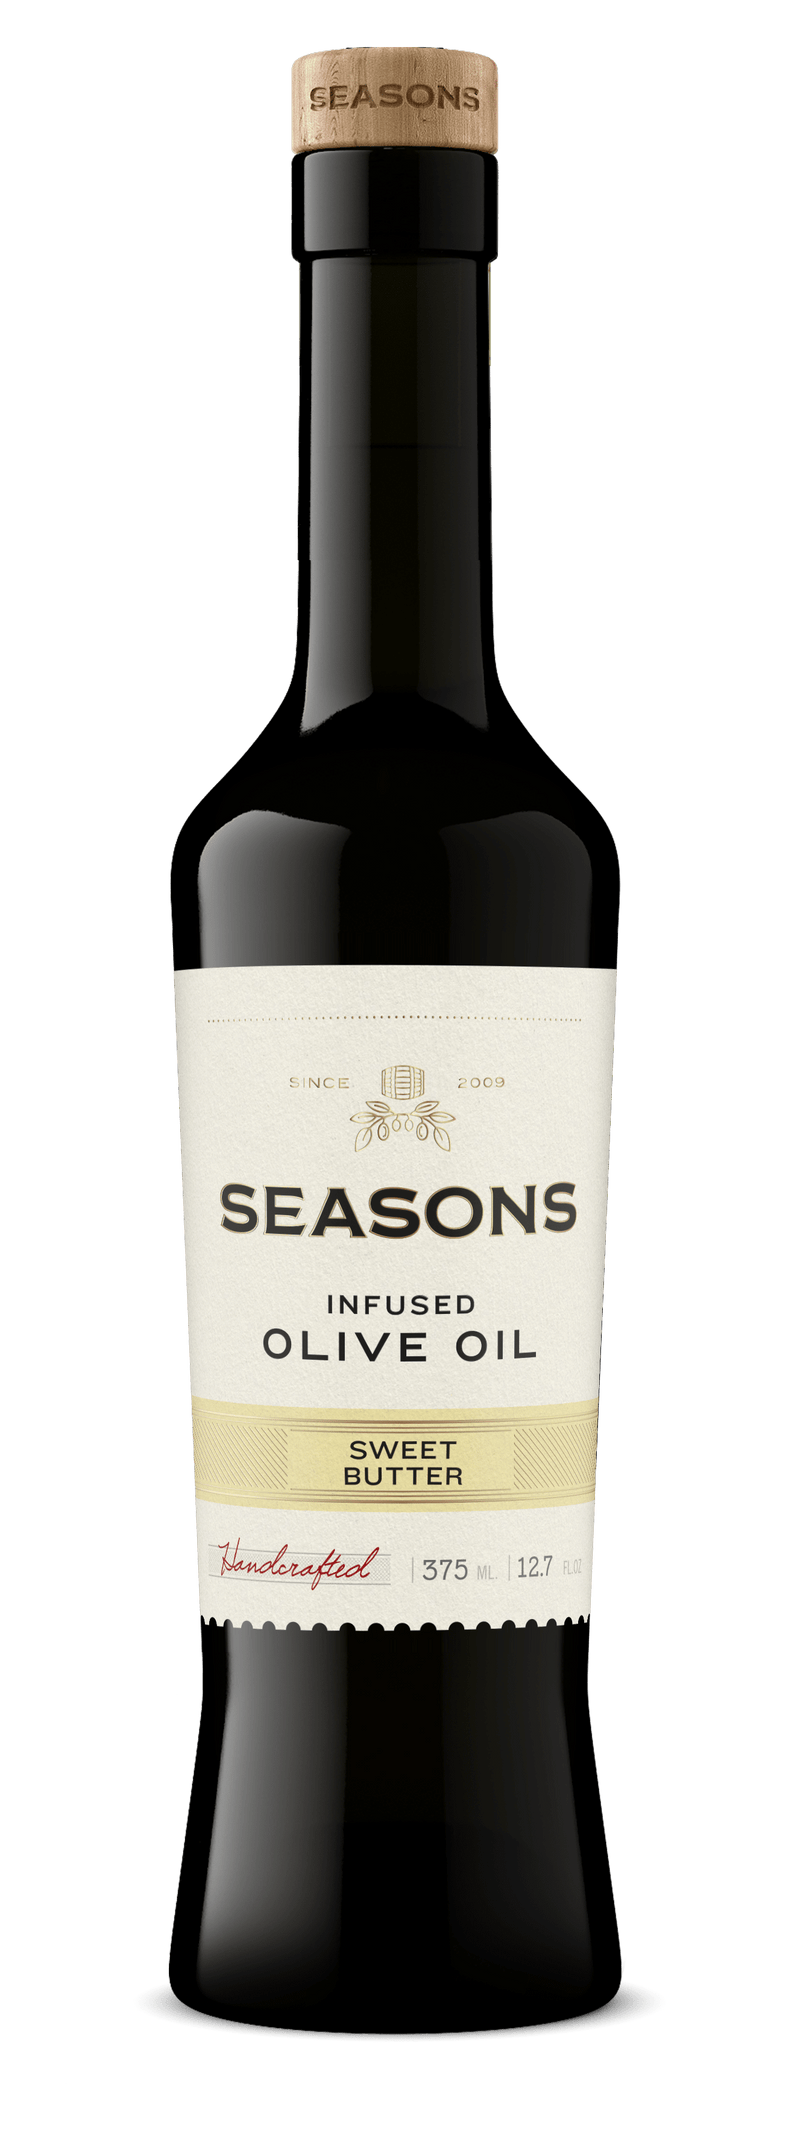 Seasons Infused Olive Oil 375mL Sweet Butter